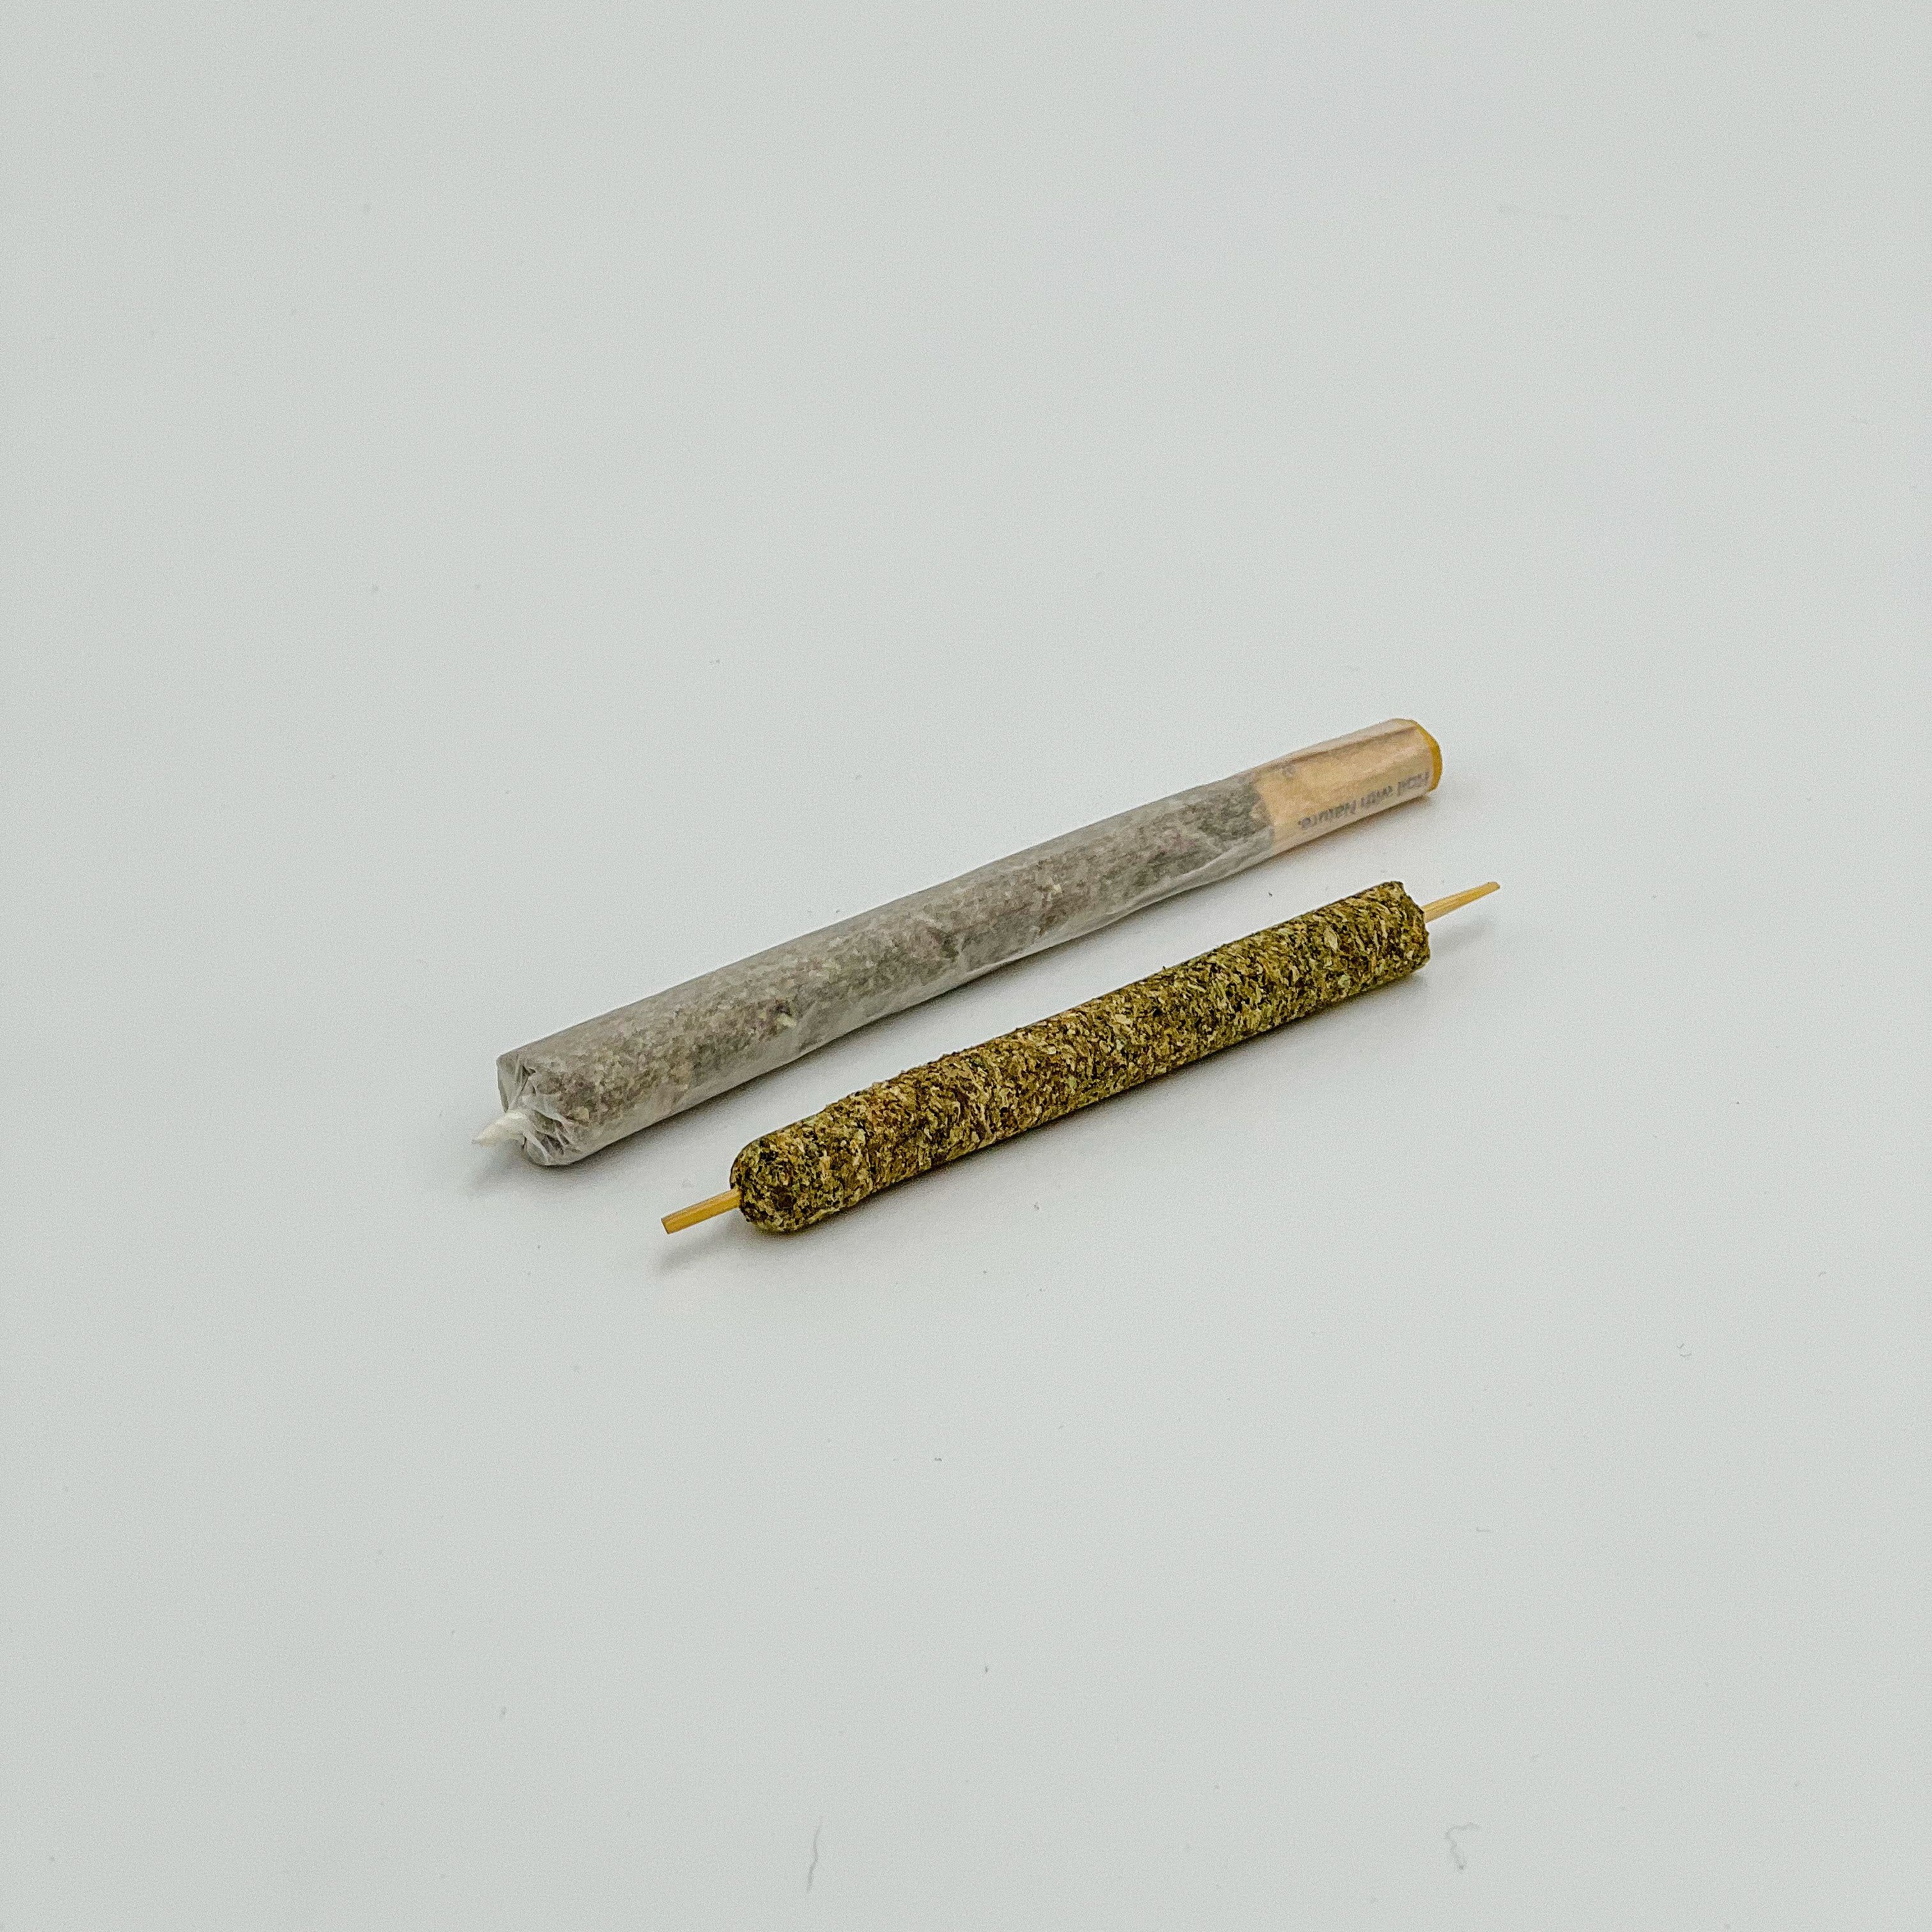 1 gram of marijuana rolled into a cannagar that has a bamboo skewer for the joint’s airflow and one cannagar wrapped in the hemp paper as a final, smokeable product